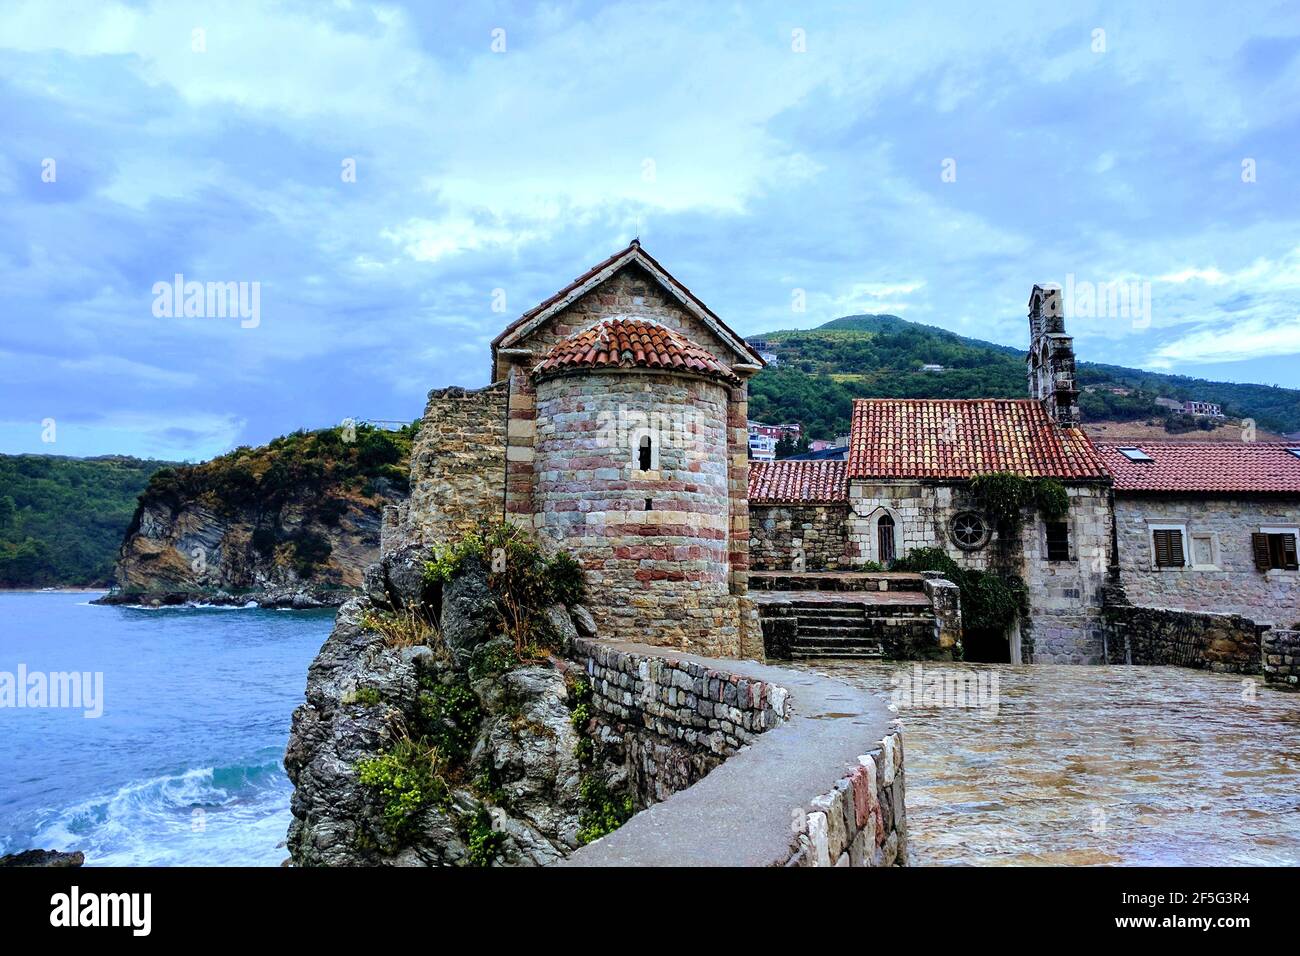 Old tower with a medieval wall on rock by the sea. Old Budva, Montenegro. Stock Photo